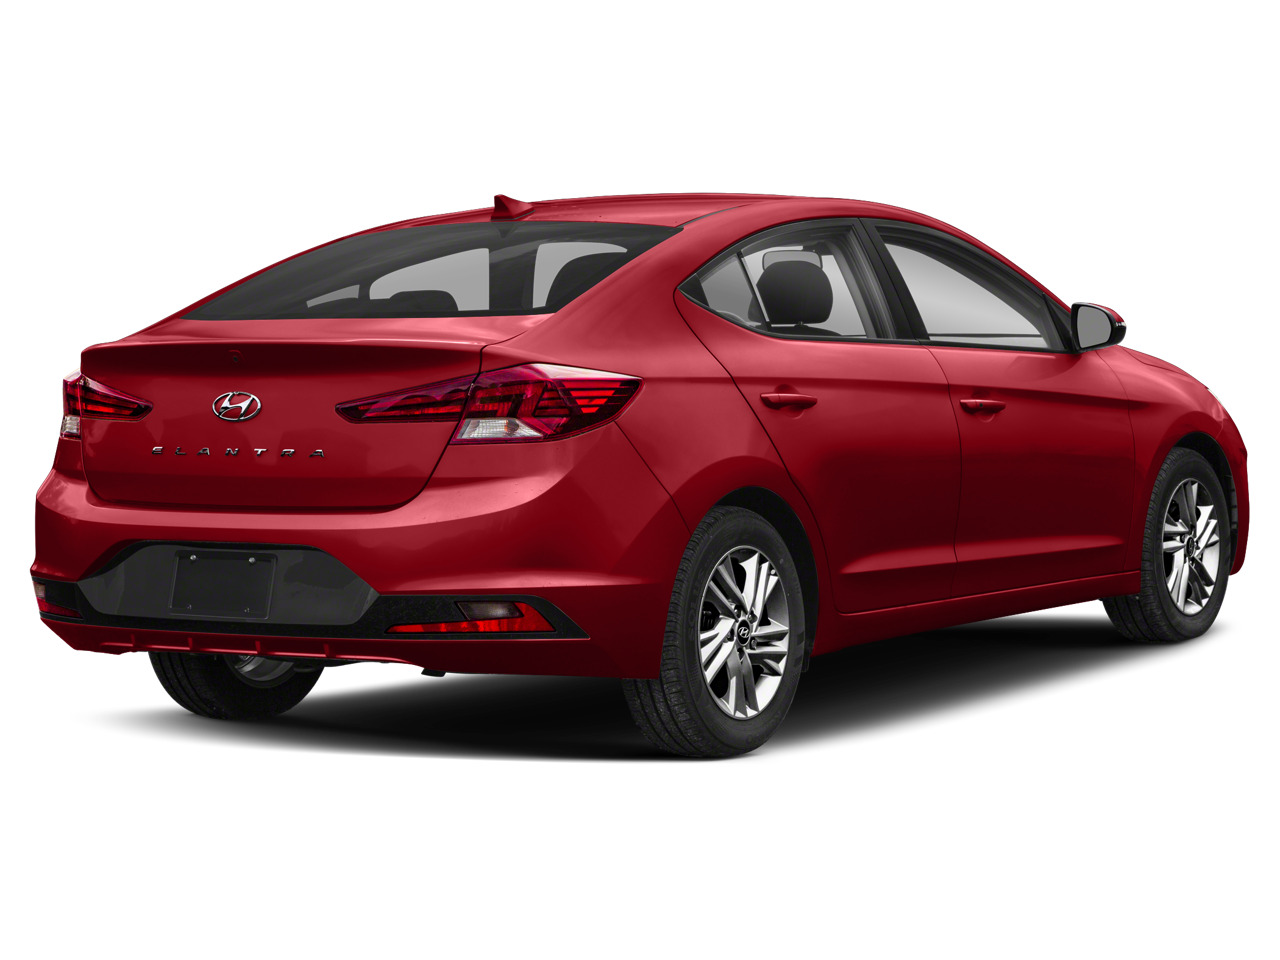 Used 2020 Hyundai Elantra Value Edition with VIN KMHD84LF9LU931994 for sale in Kenvil, NJ